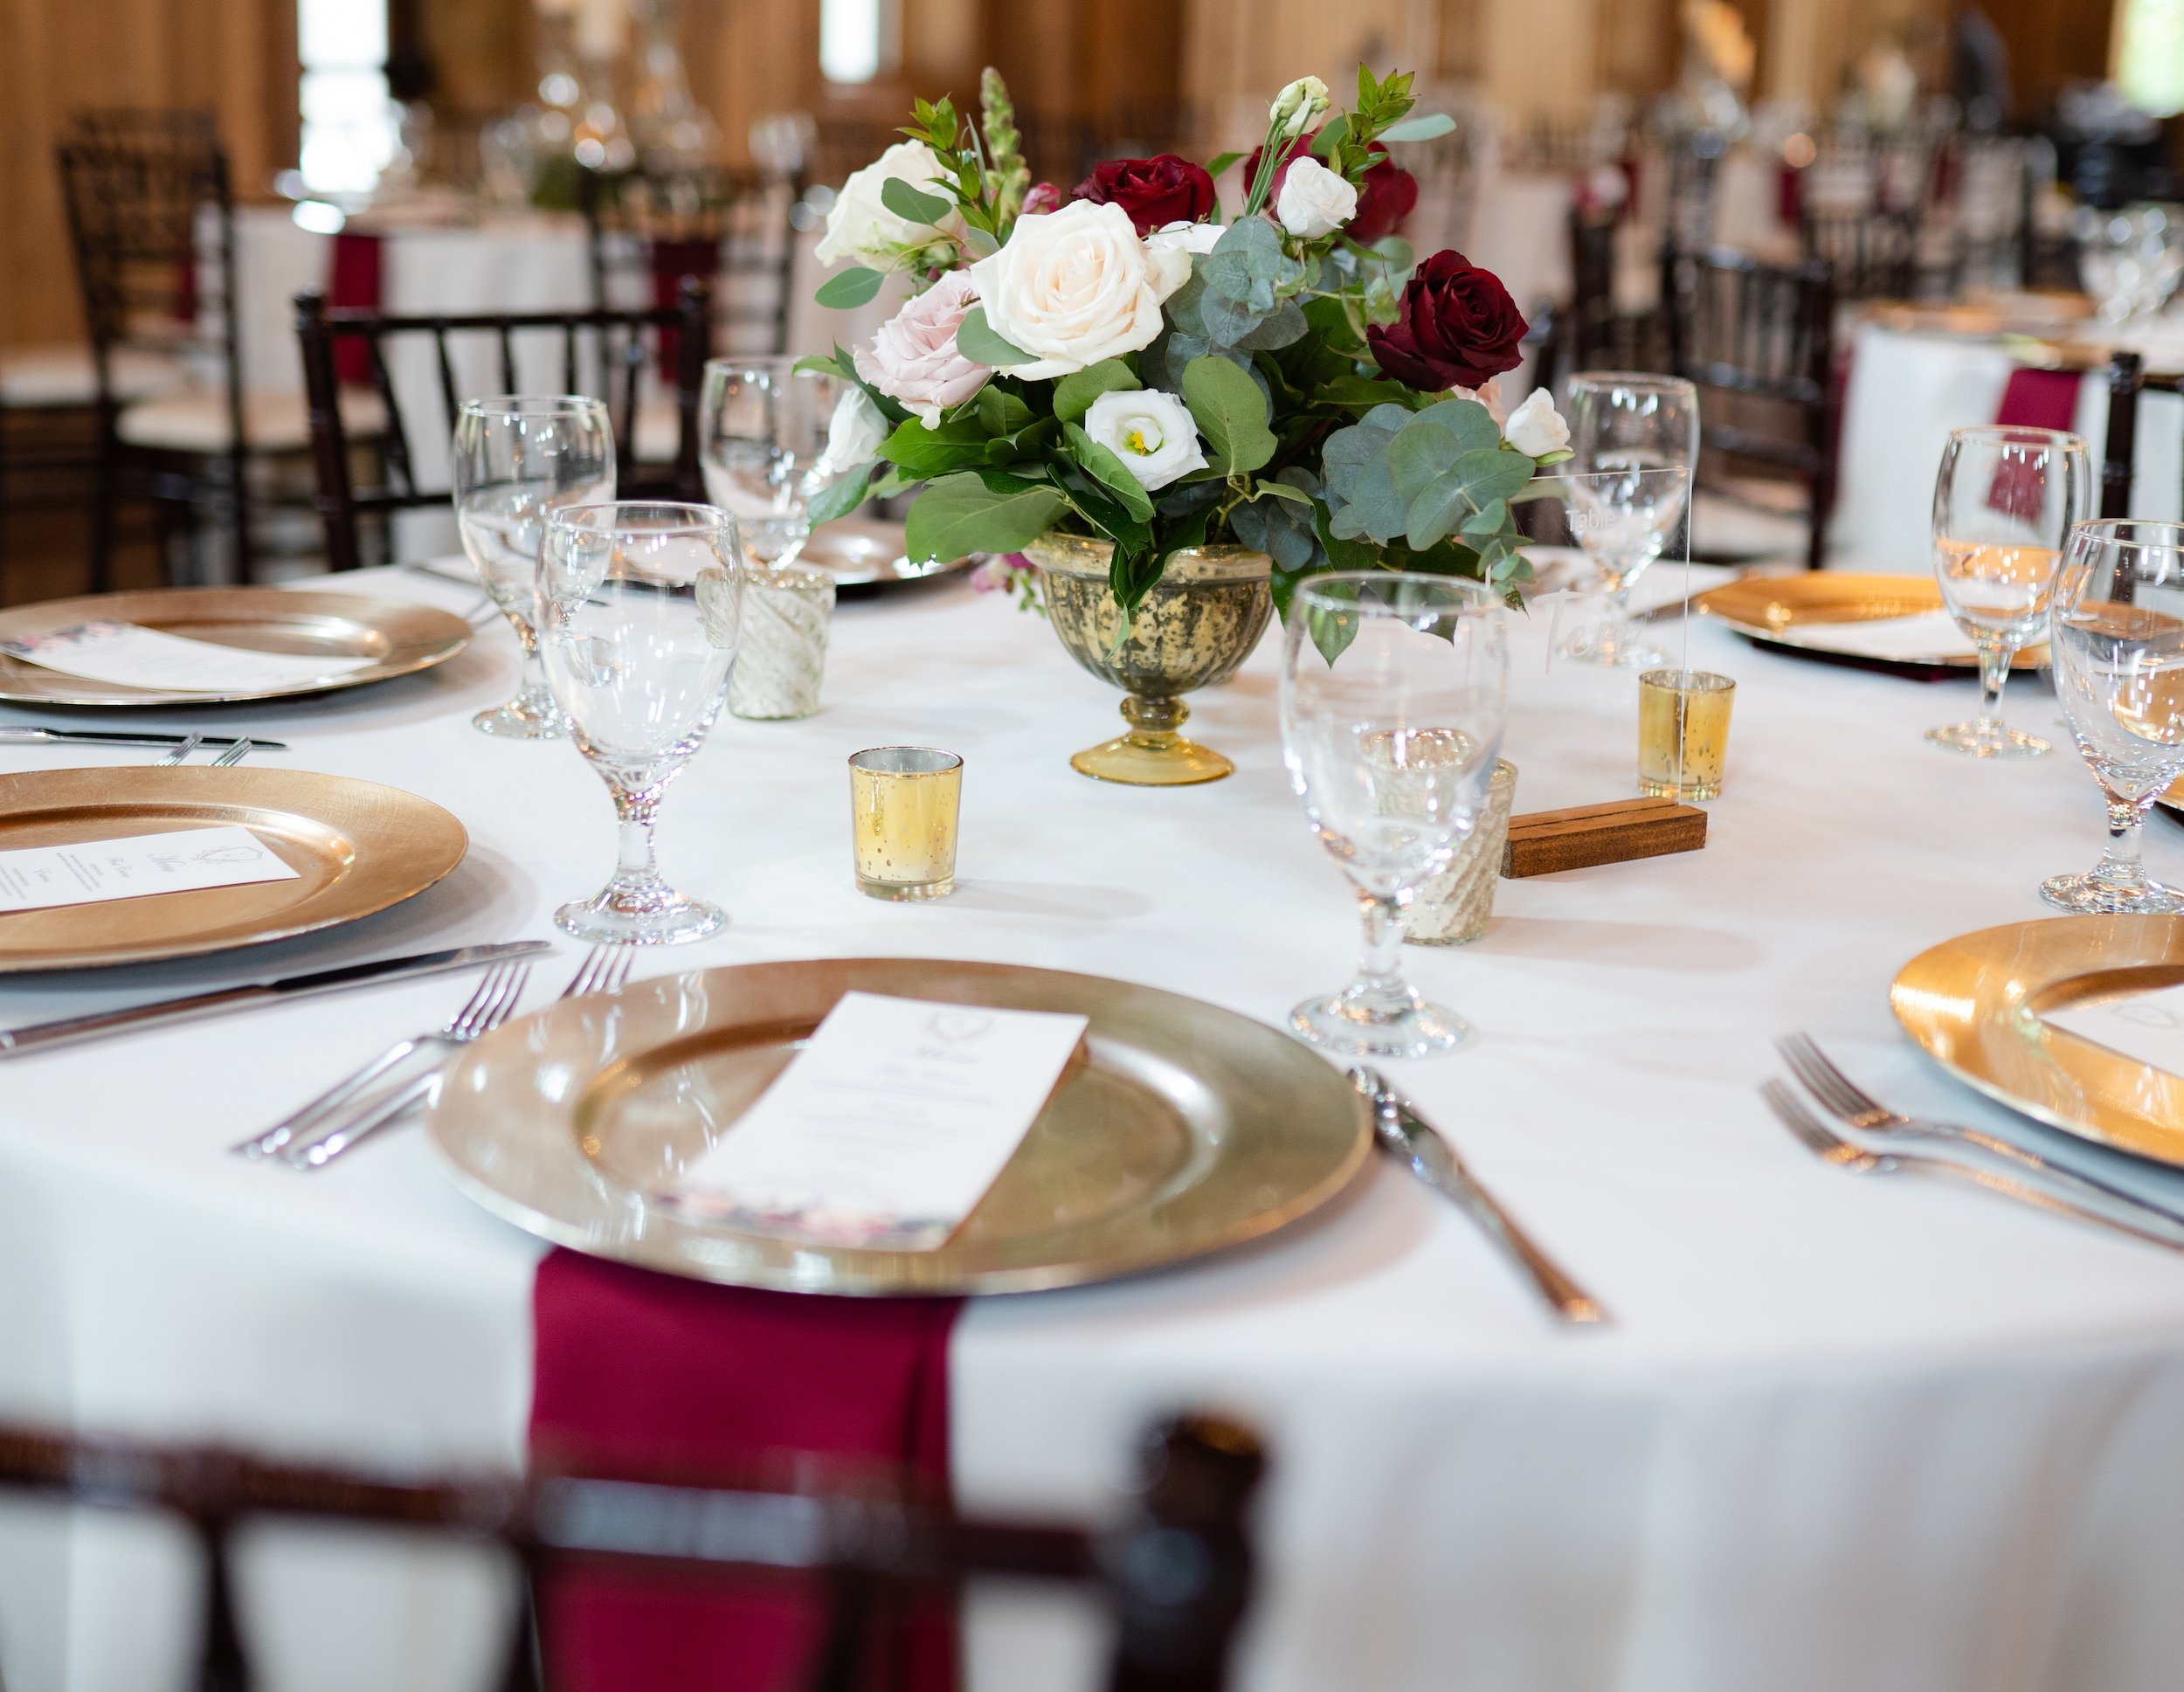 One of the reception tables is set up with gold and burgundy accents and floral centerpieces.